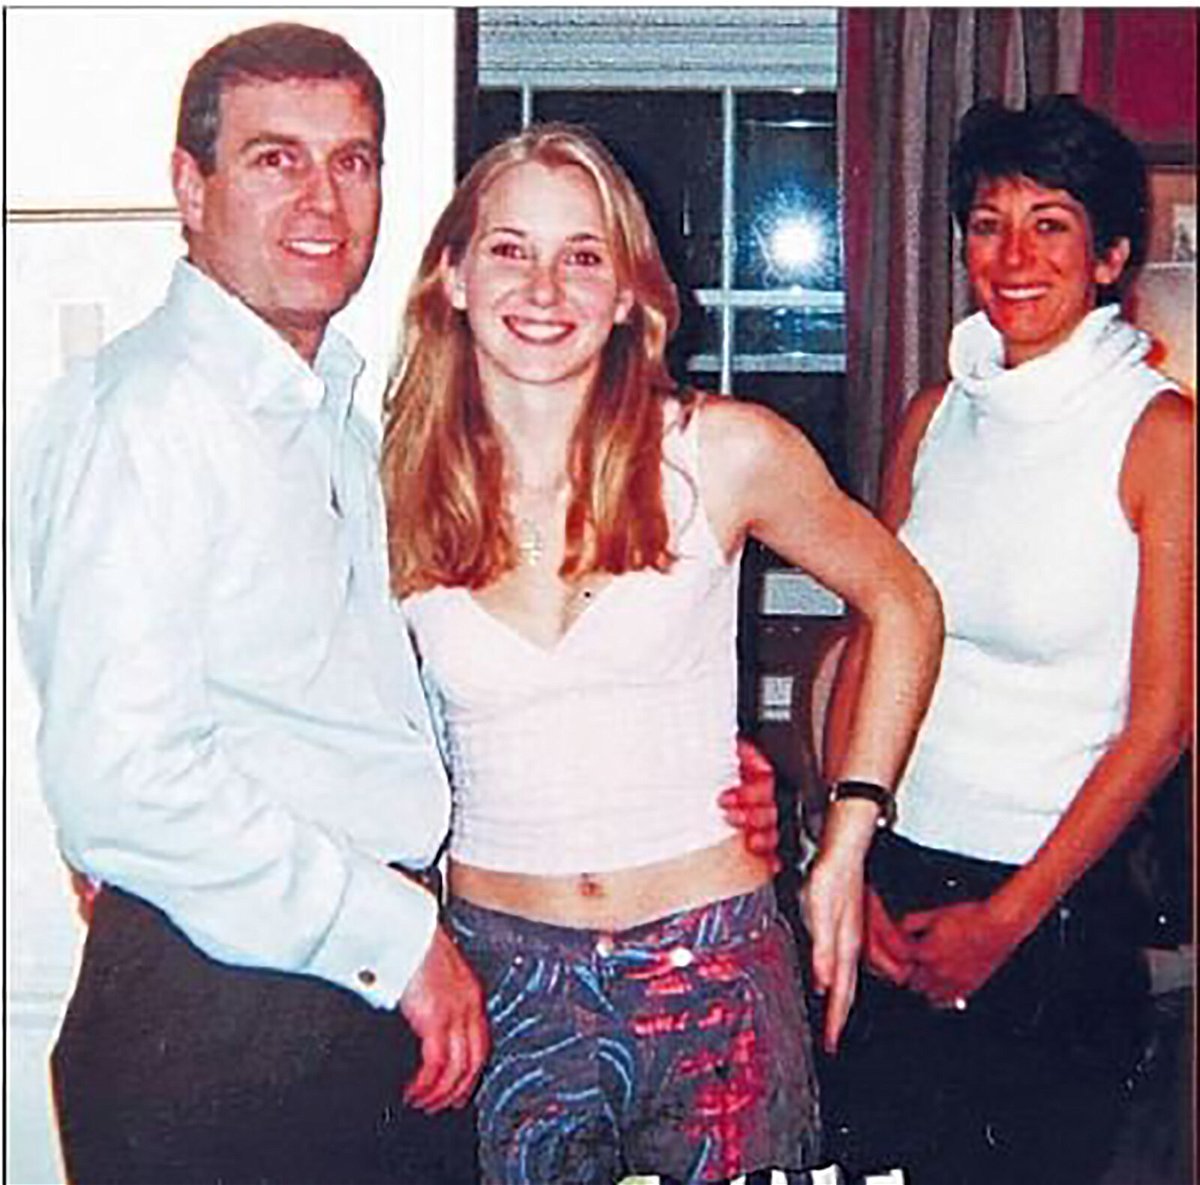 <i>Florida Southern District Court</i><br/>A photograph appearing to show Prince Andrew with Jeffrey Epstein's accuser Virginia Roberts Giuffre and